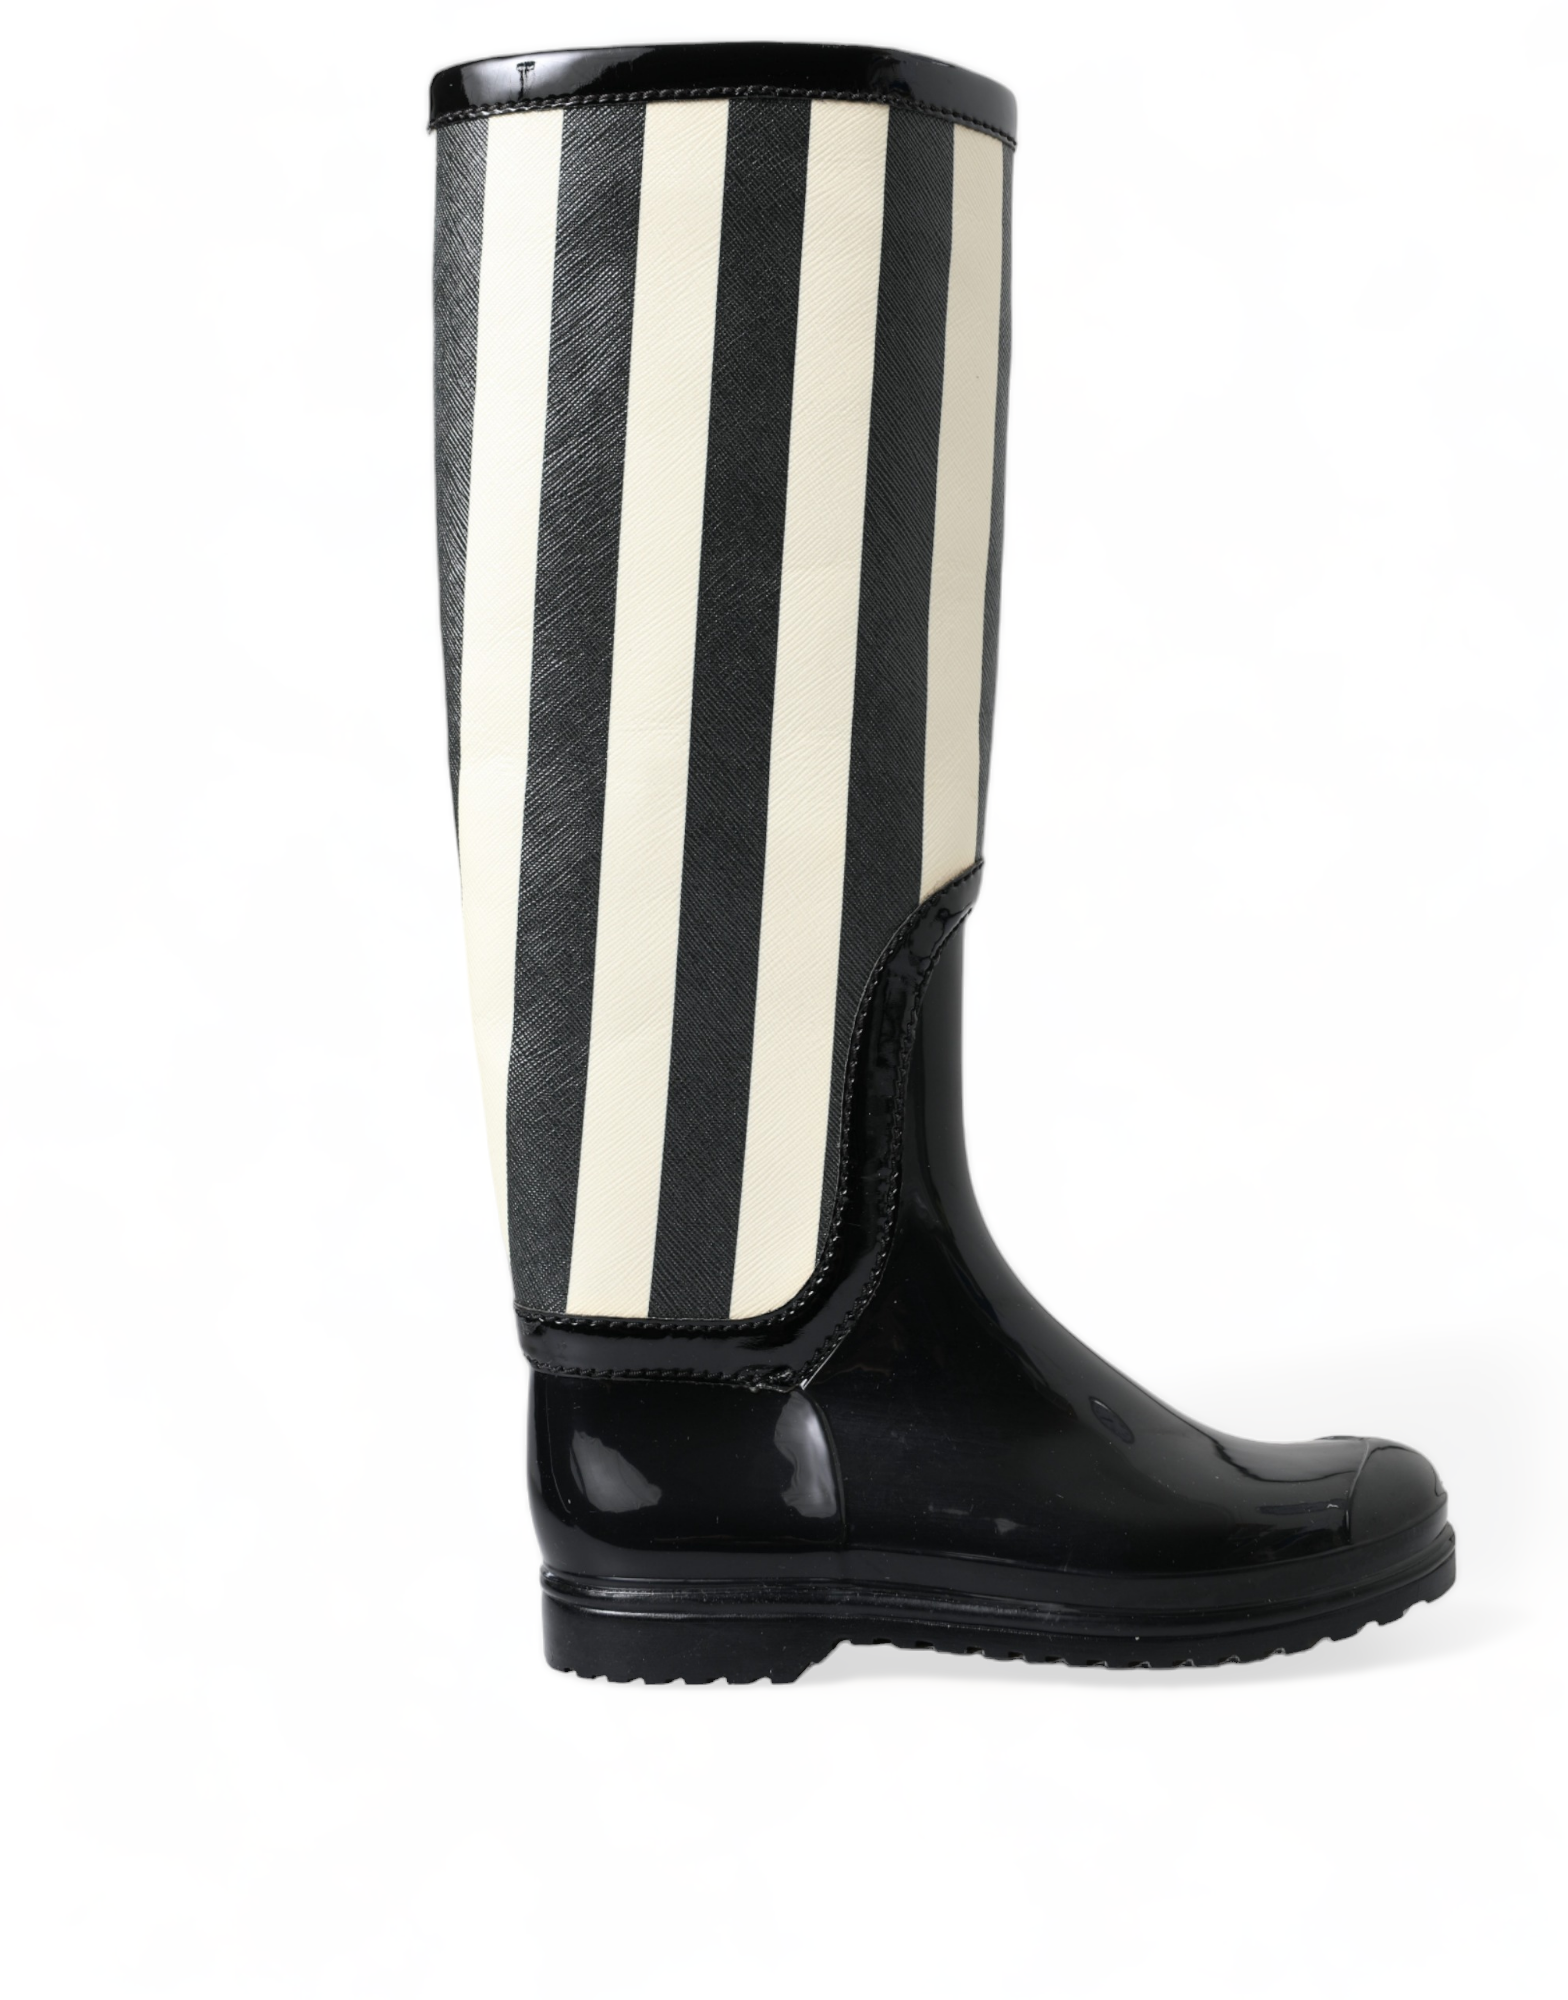 Black and White Striped Knee High Boots